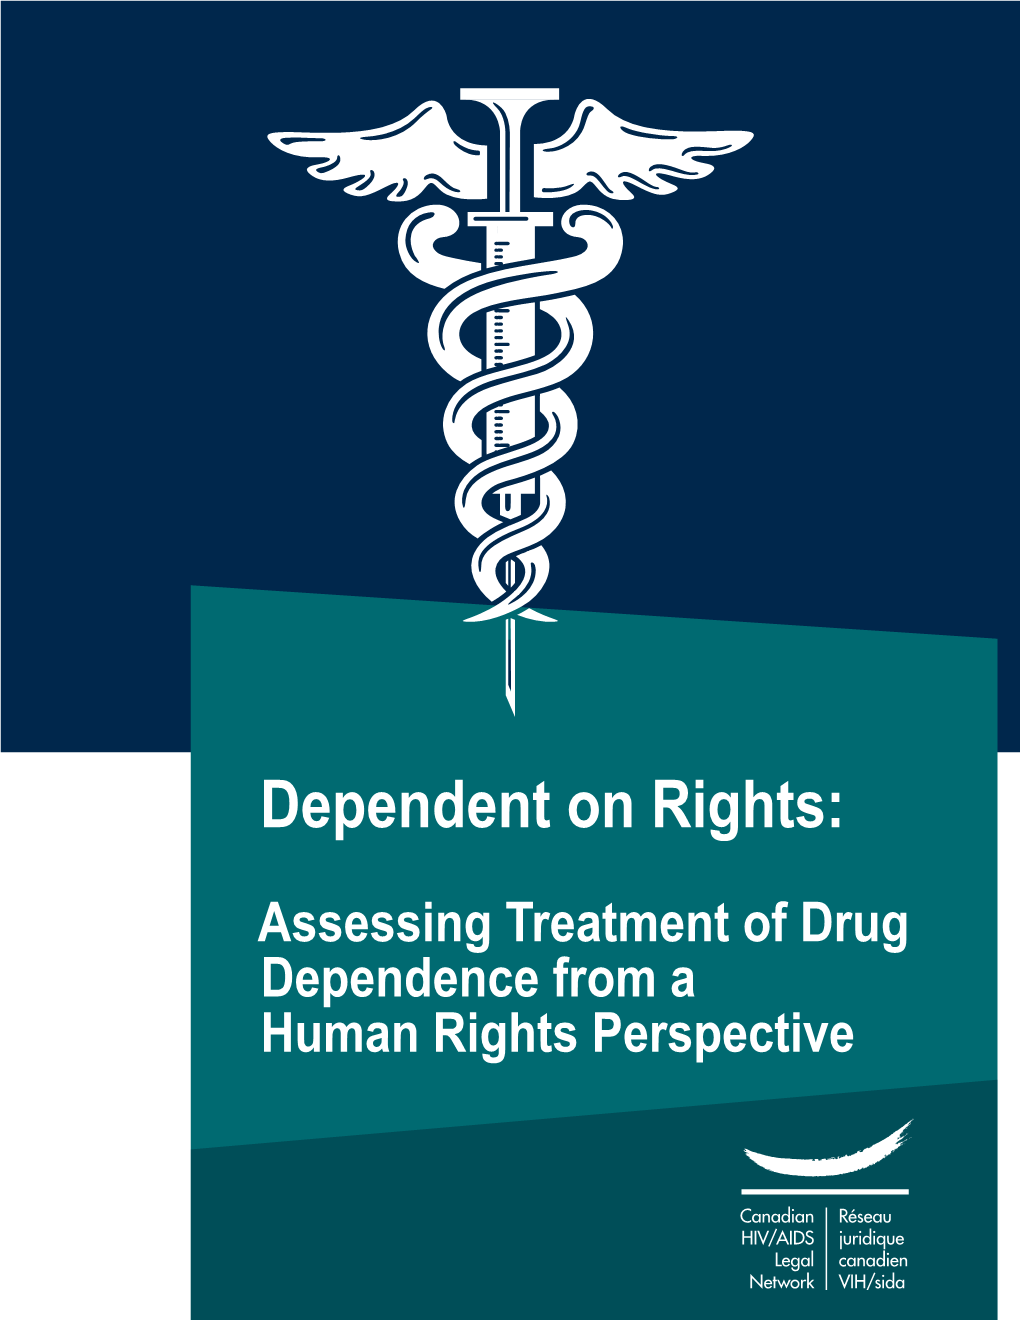 Assessing Treatment of Drug Dependence from a Human Rights Perspective Dependent on Rights: Assessing Treatment of Drug Dependence from a Human Rights Perspective